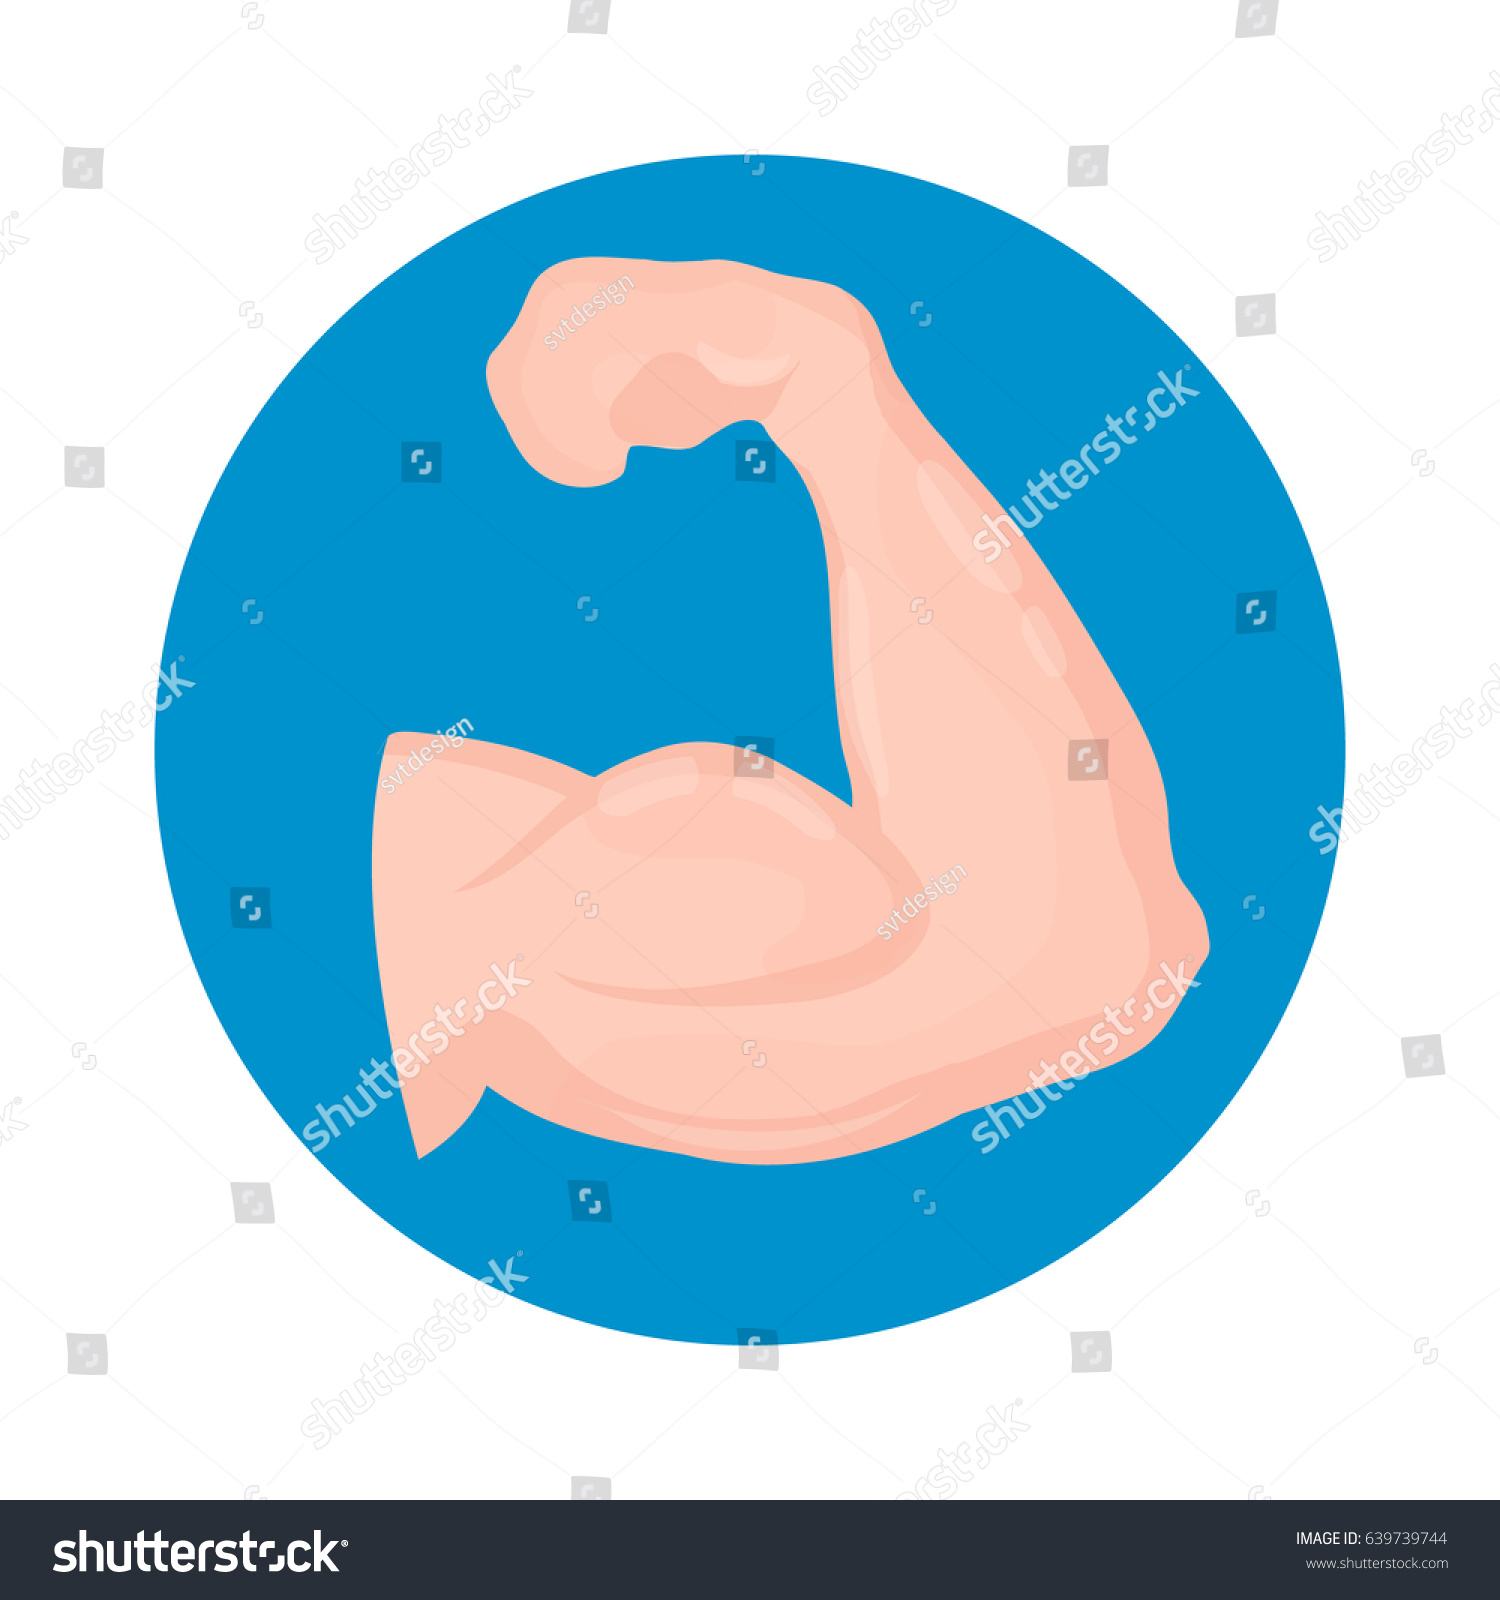 Biceps Icon Isolated On White Background Stock Vector 639739744 ...